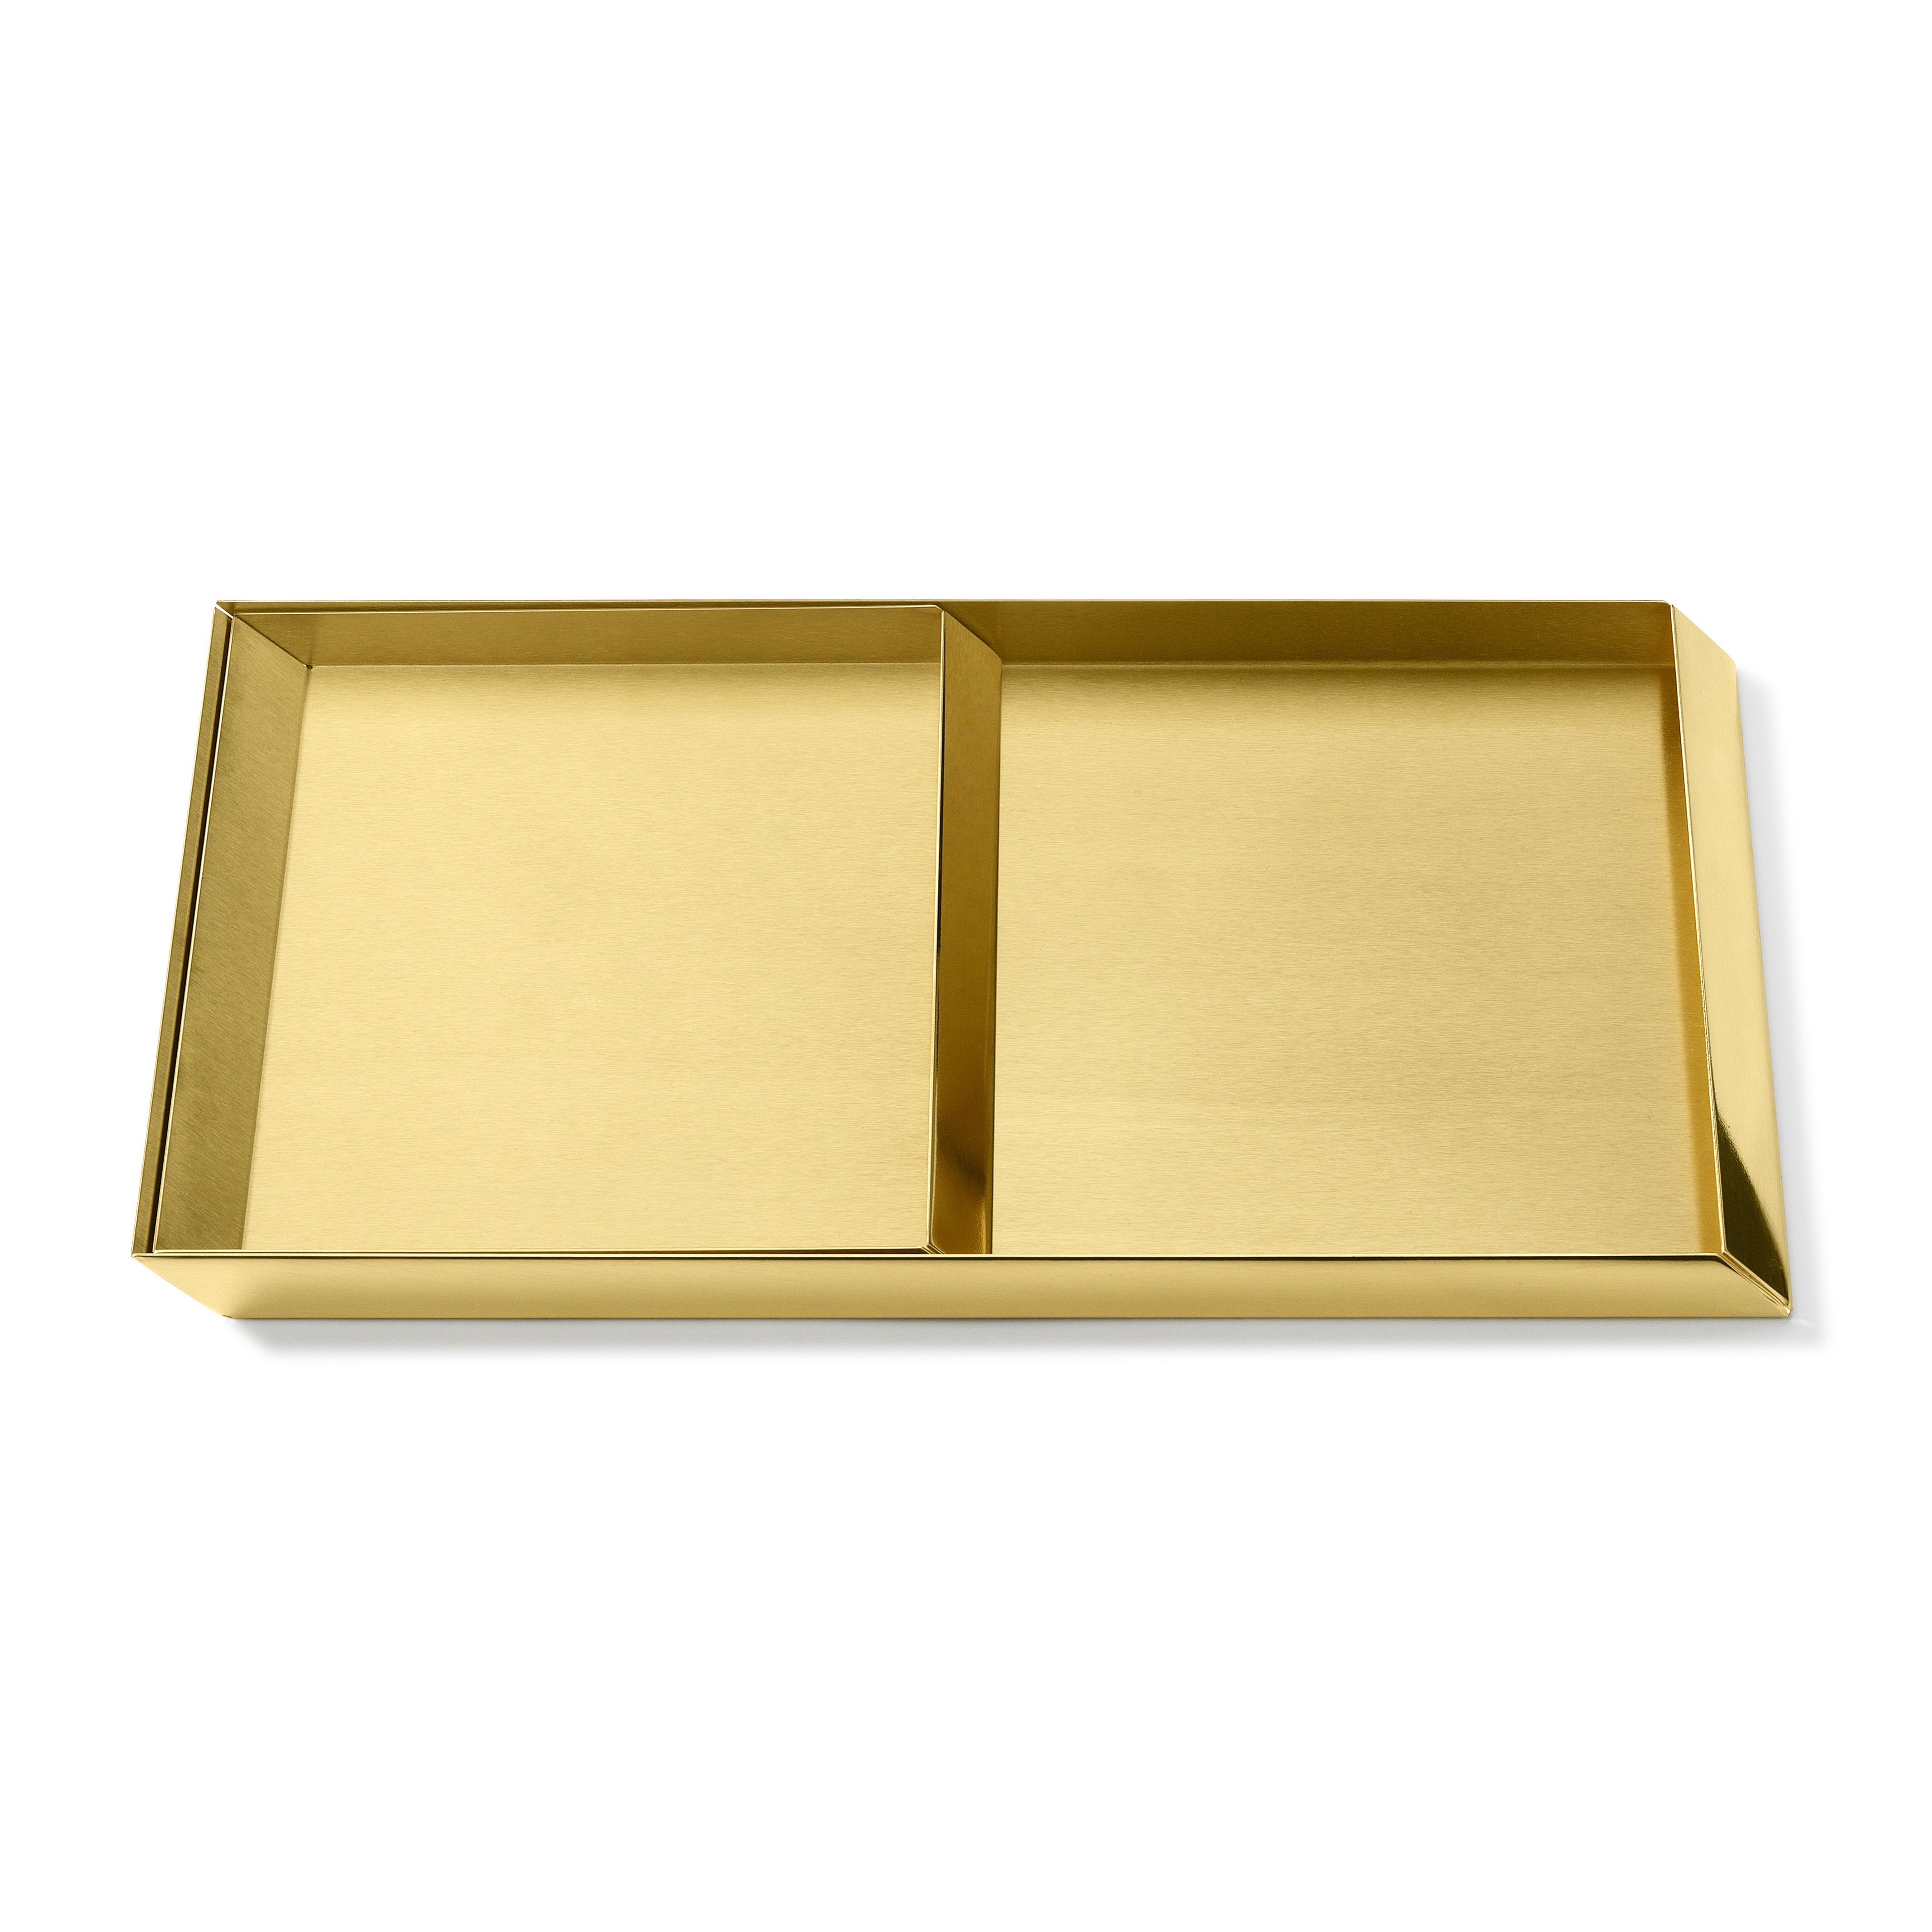 Modern 'Set of 2' Ghidini 1961 Axonometry Trays in Brass by Elisa Giovanni For Sale